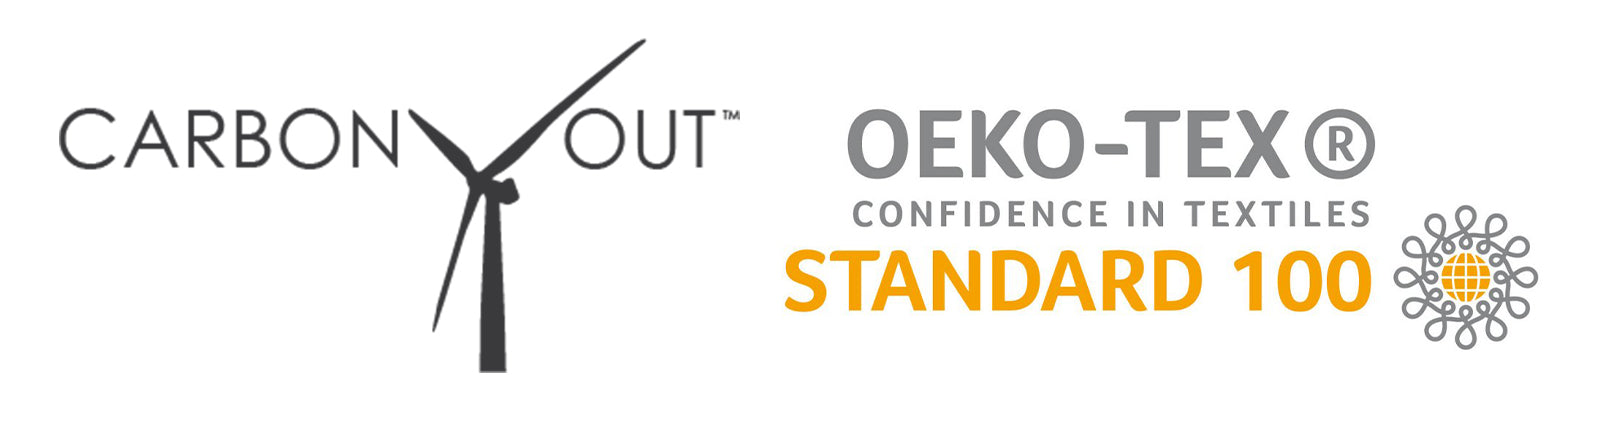 Carbon Checkout and OEKO-TEX logos